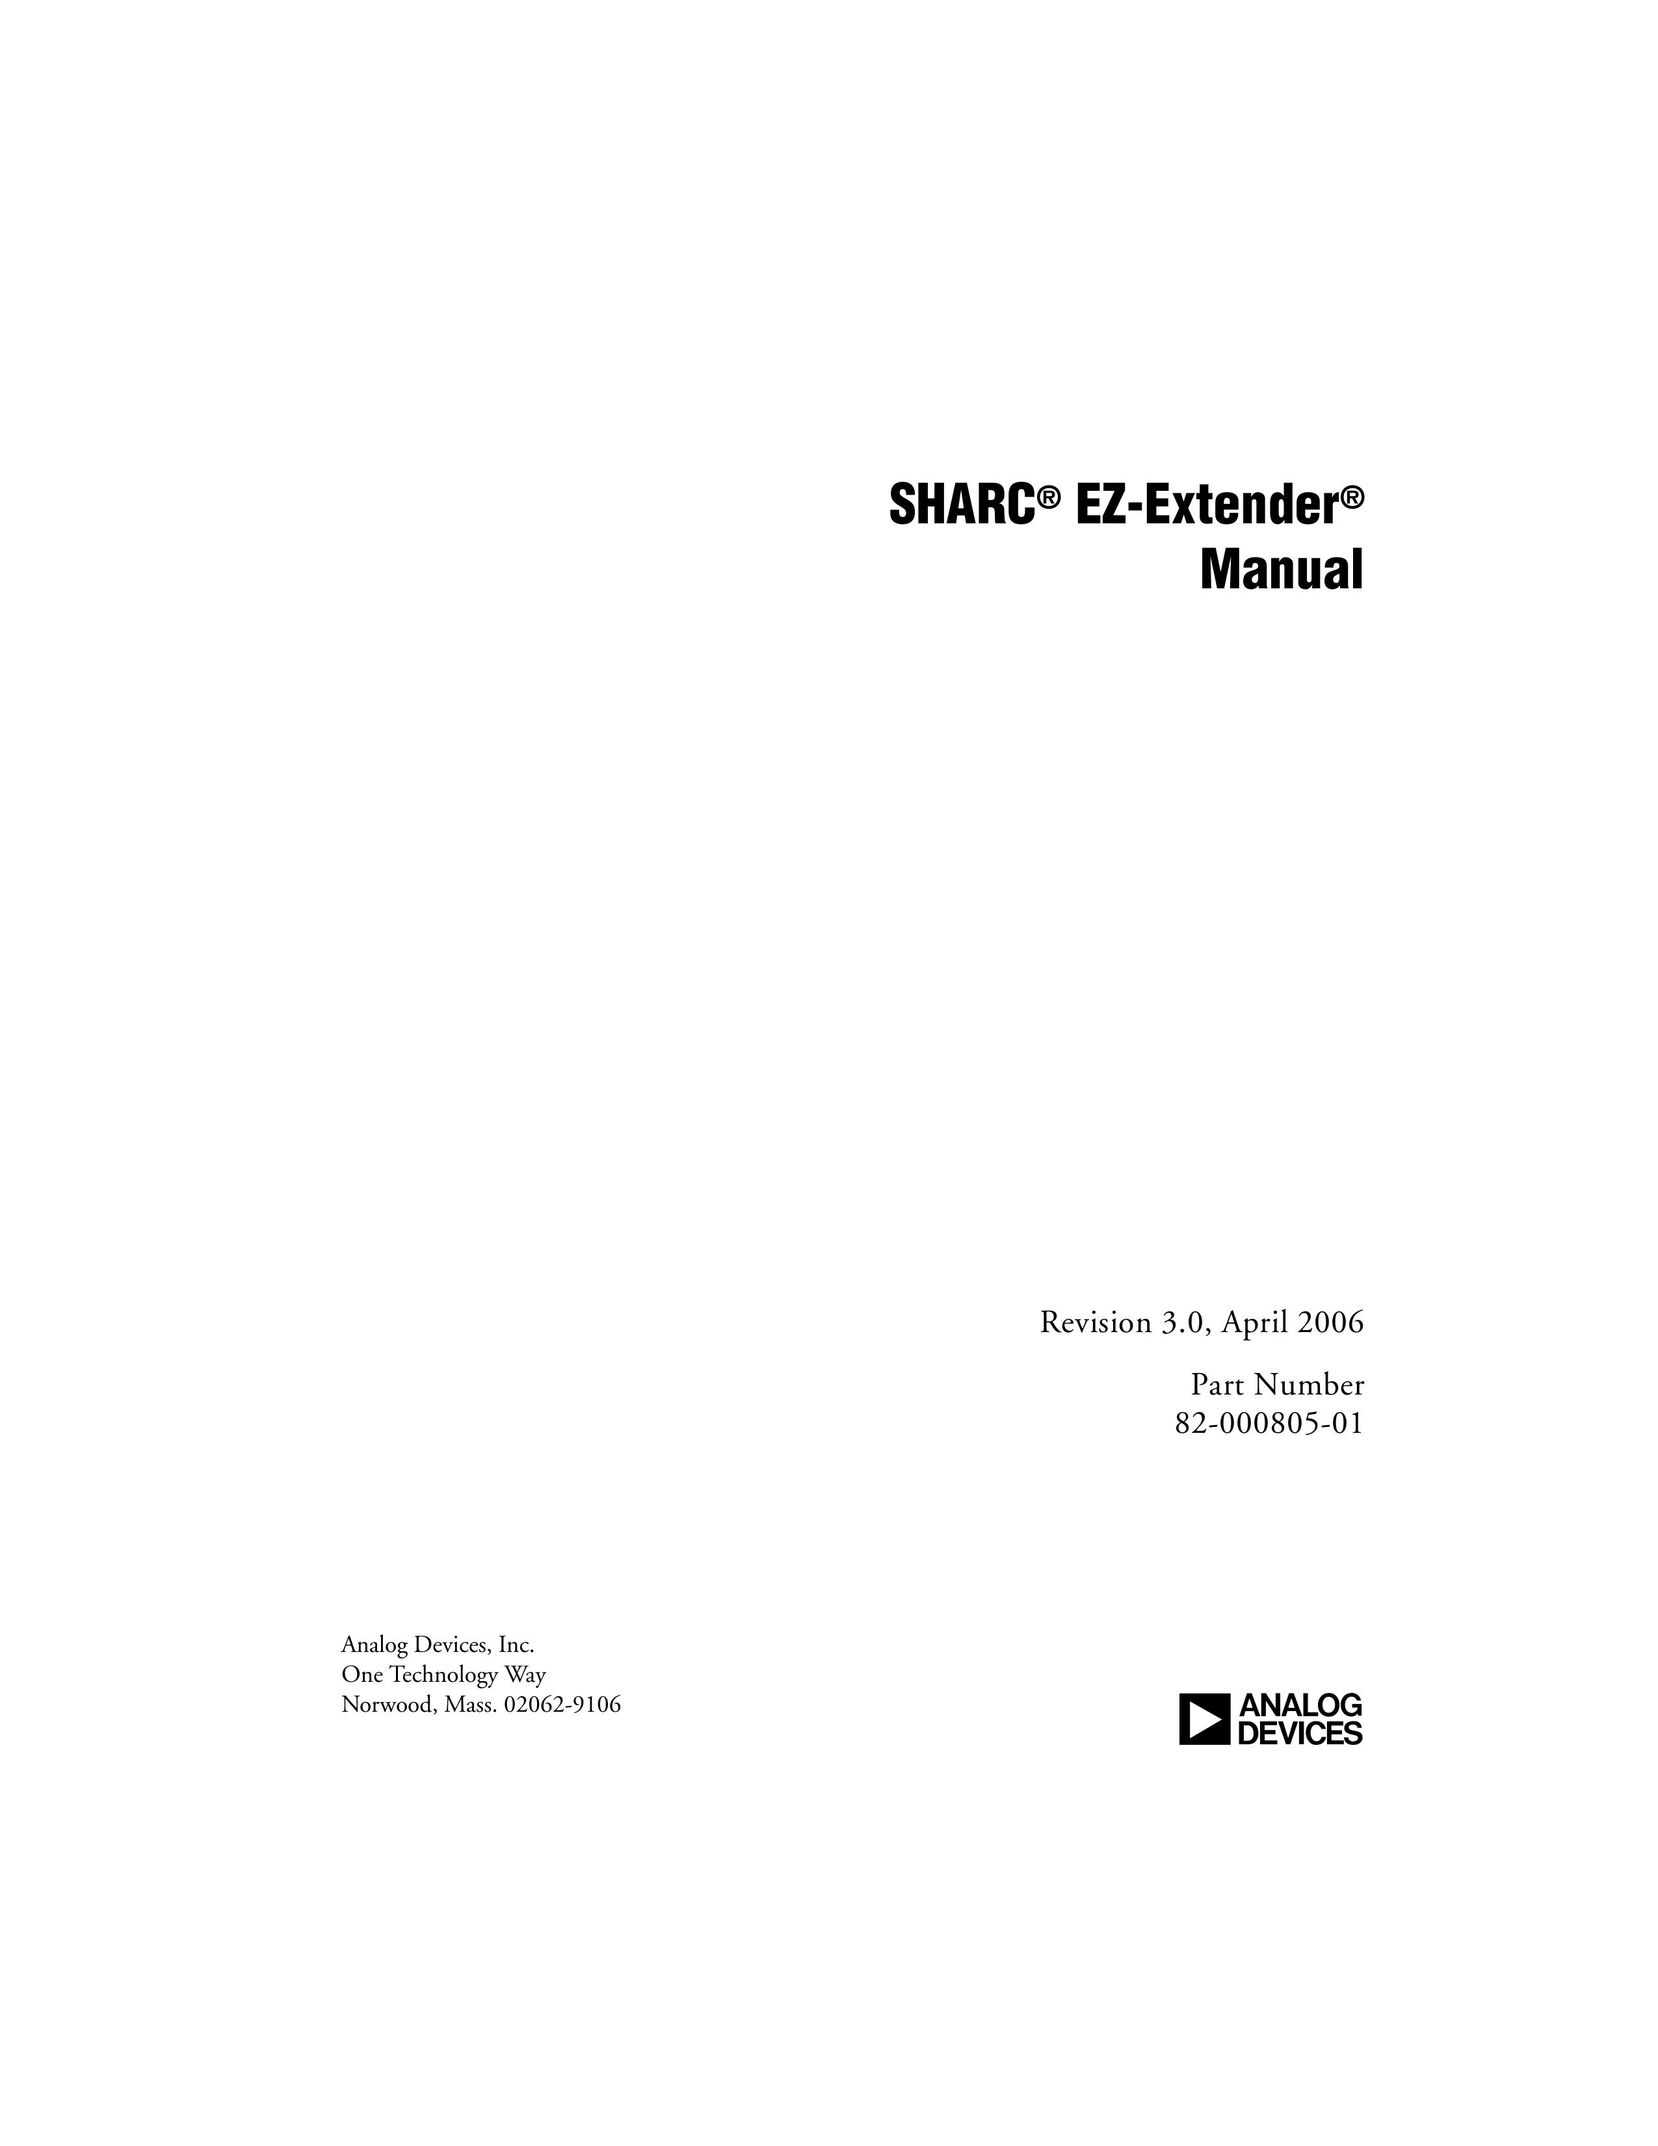 Analog Devices 82-000805-01 Network Card User Manual